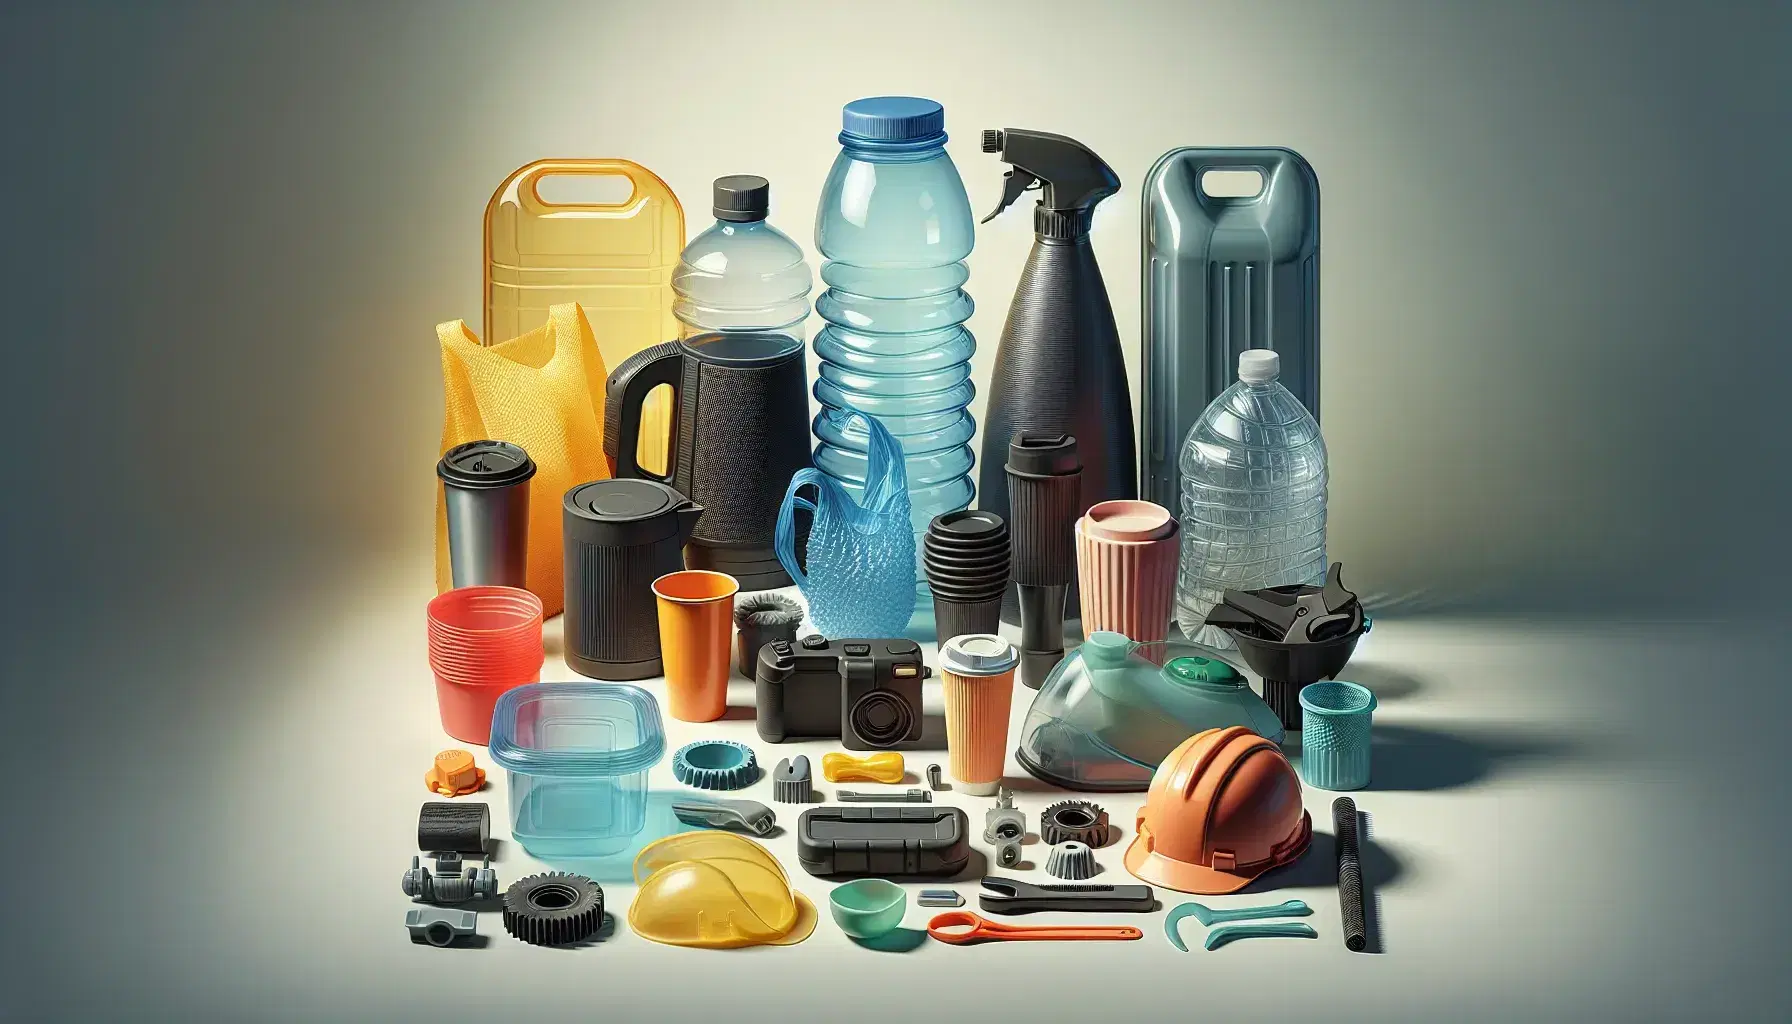 Variety of plastic objects on light background: transparent bottle, red cup, yellow bag, black kettle, green utensil, orange hard hat, container and gear.